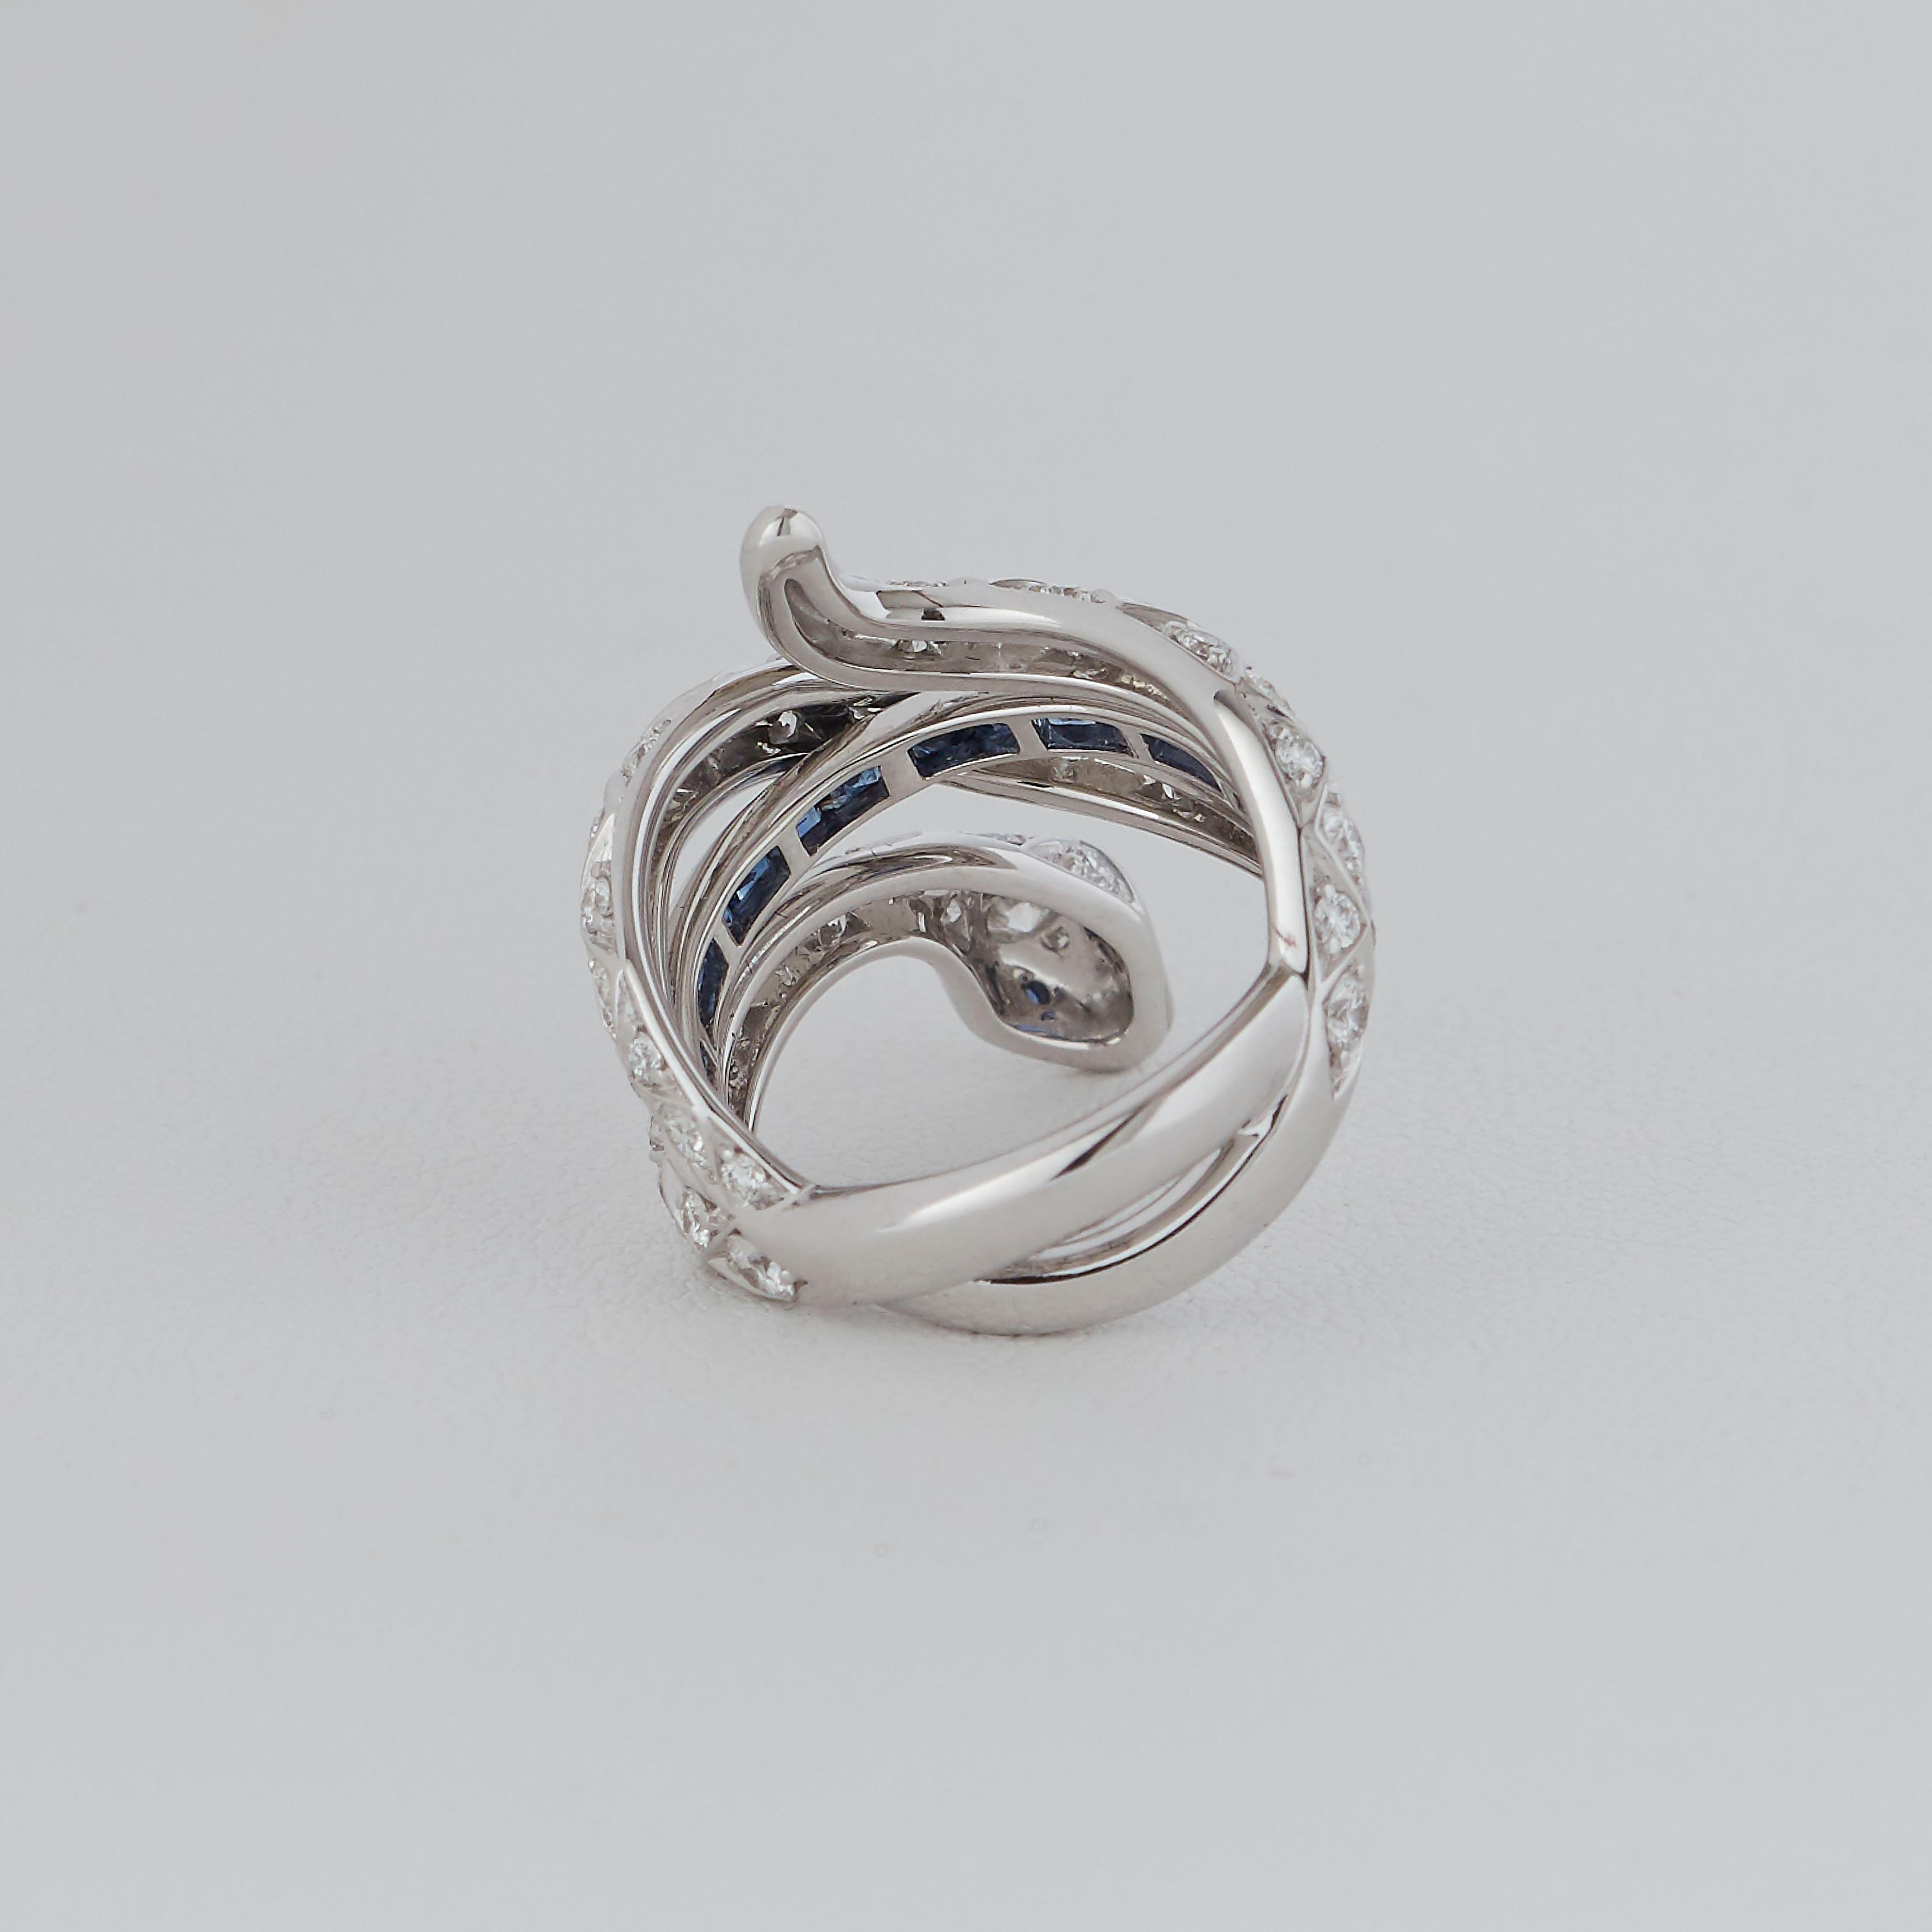 Garrard 'Muse' Signature Serpent 18 Karat White Gold Sapphire and Diamond Ring In New Condition For Sale In London, London